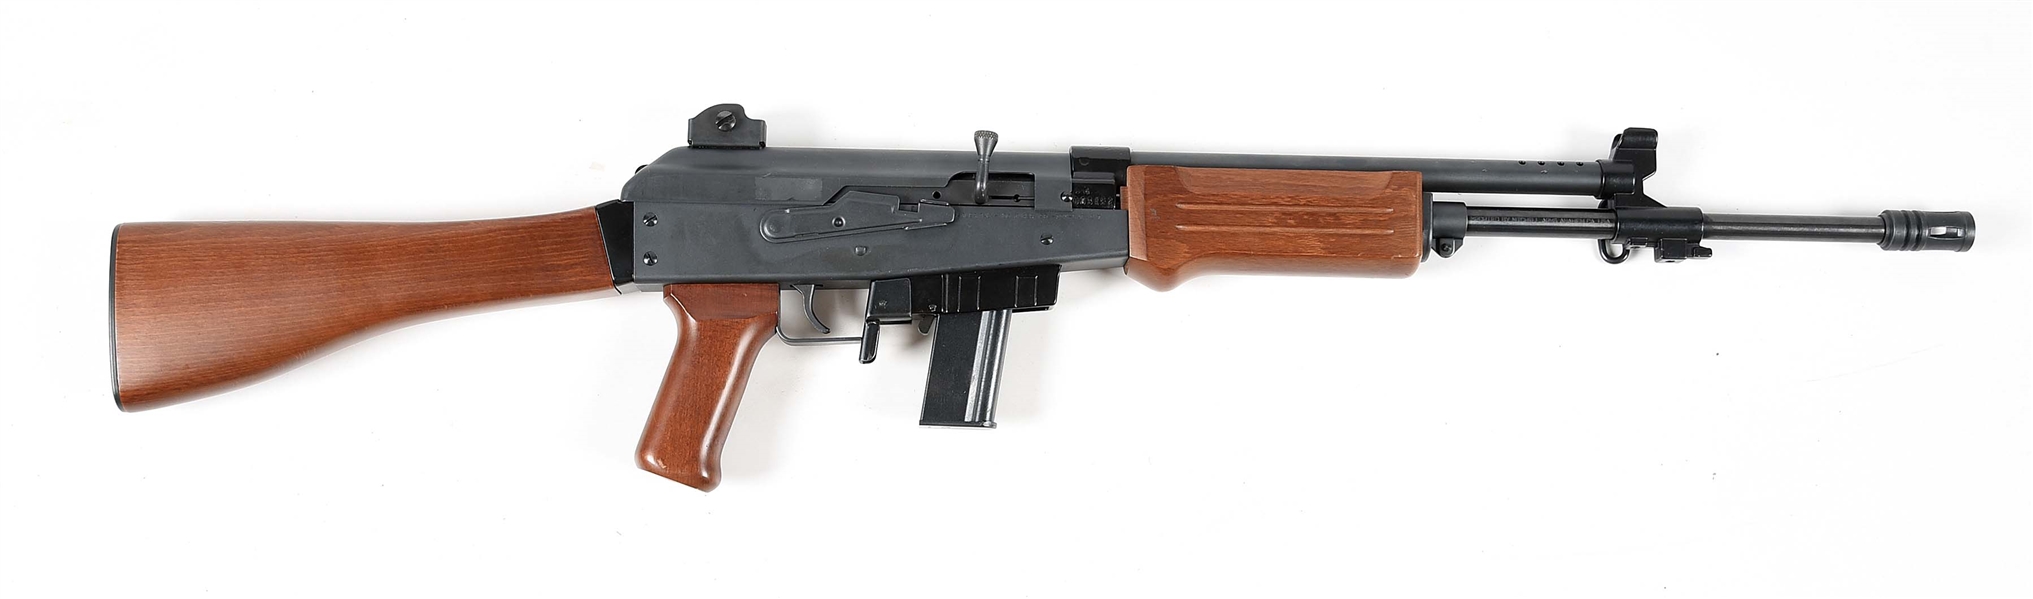 (M) ADLER JAGER AP84 GALIL STYLE SEMI AUTOMATIC RIFLE